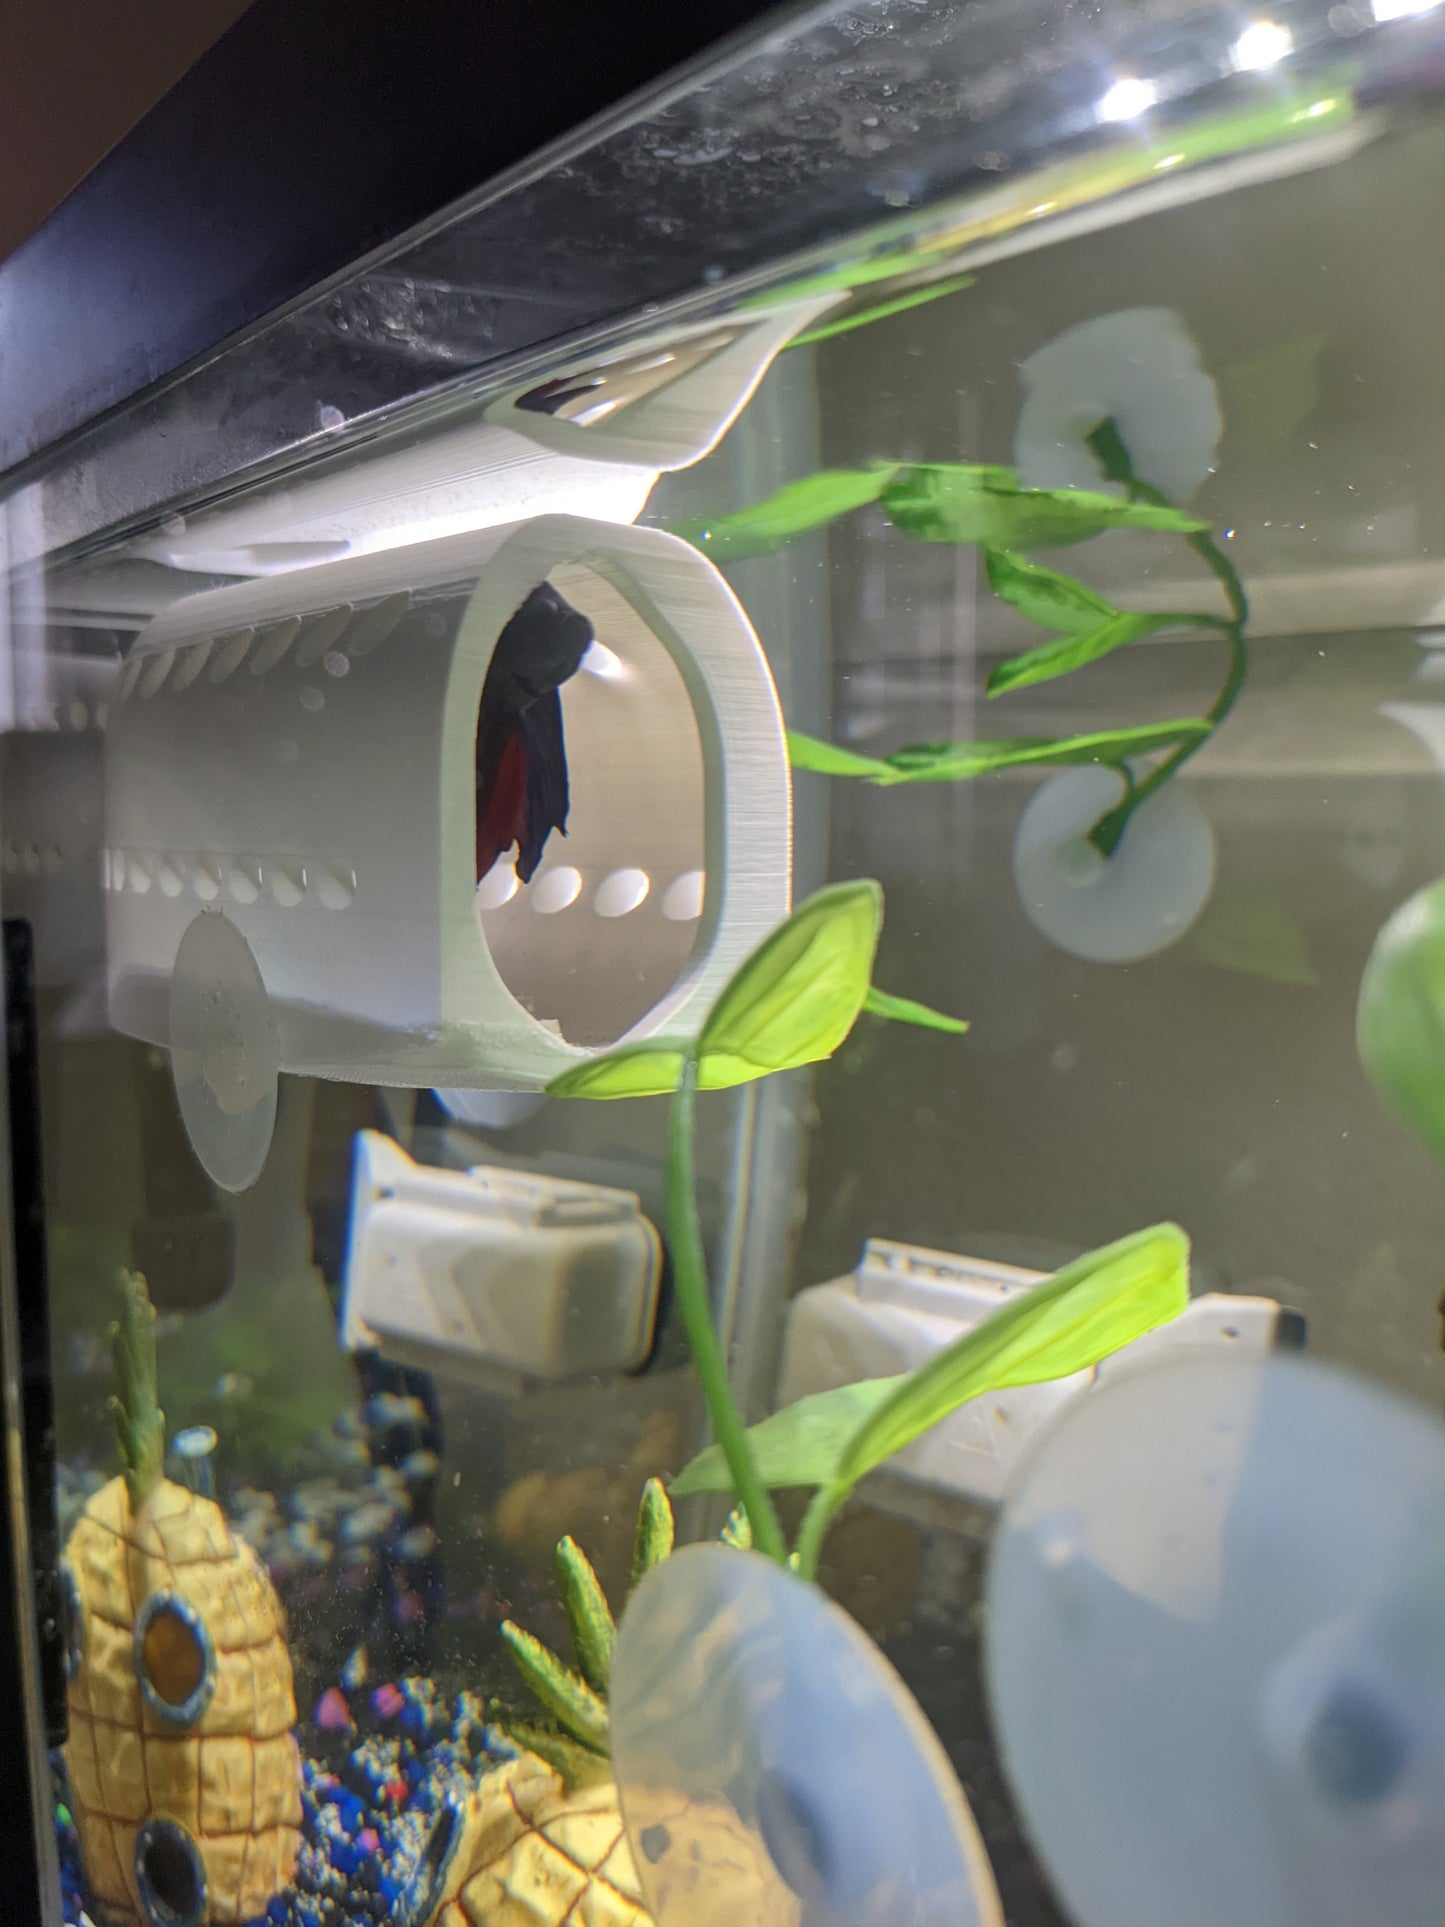 Curved Betta Home, Axolotl Home, Corner Fish Hide - Pet Safe 3D Printed ABS Plastic